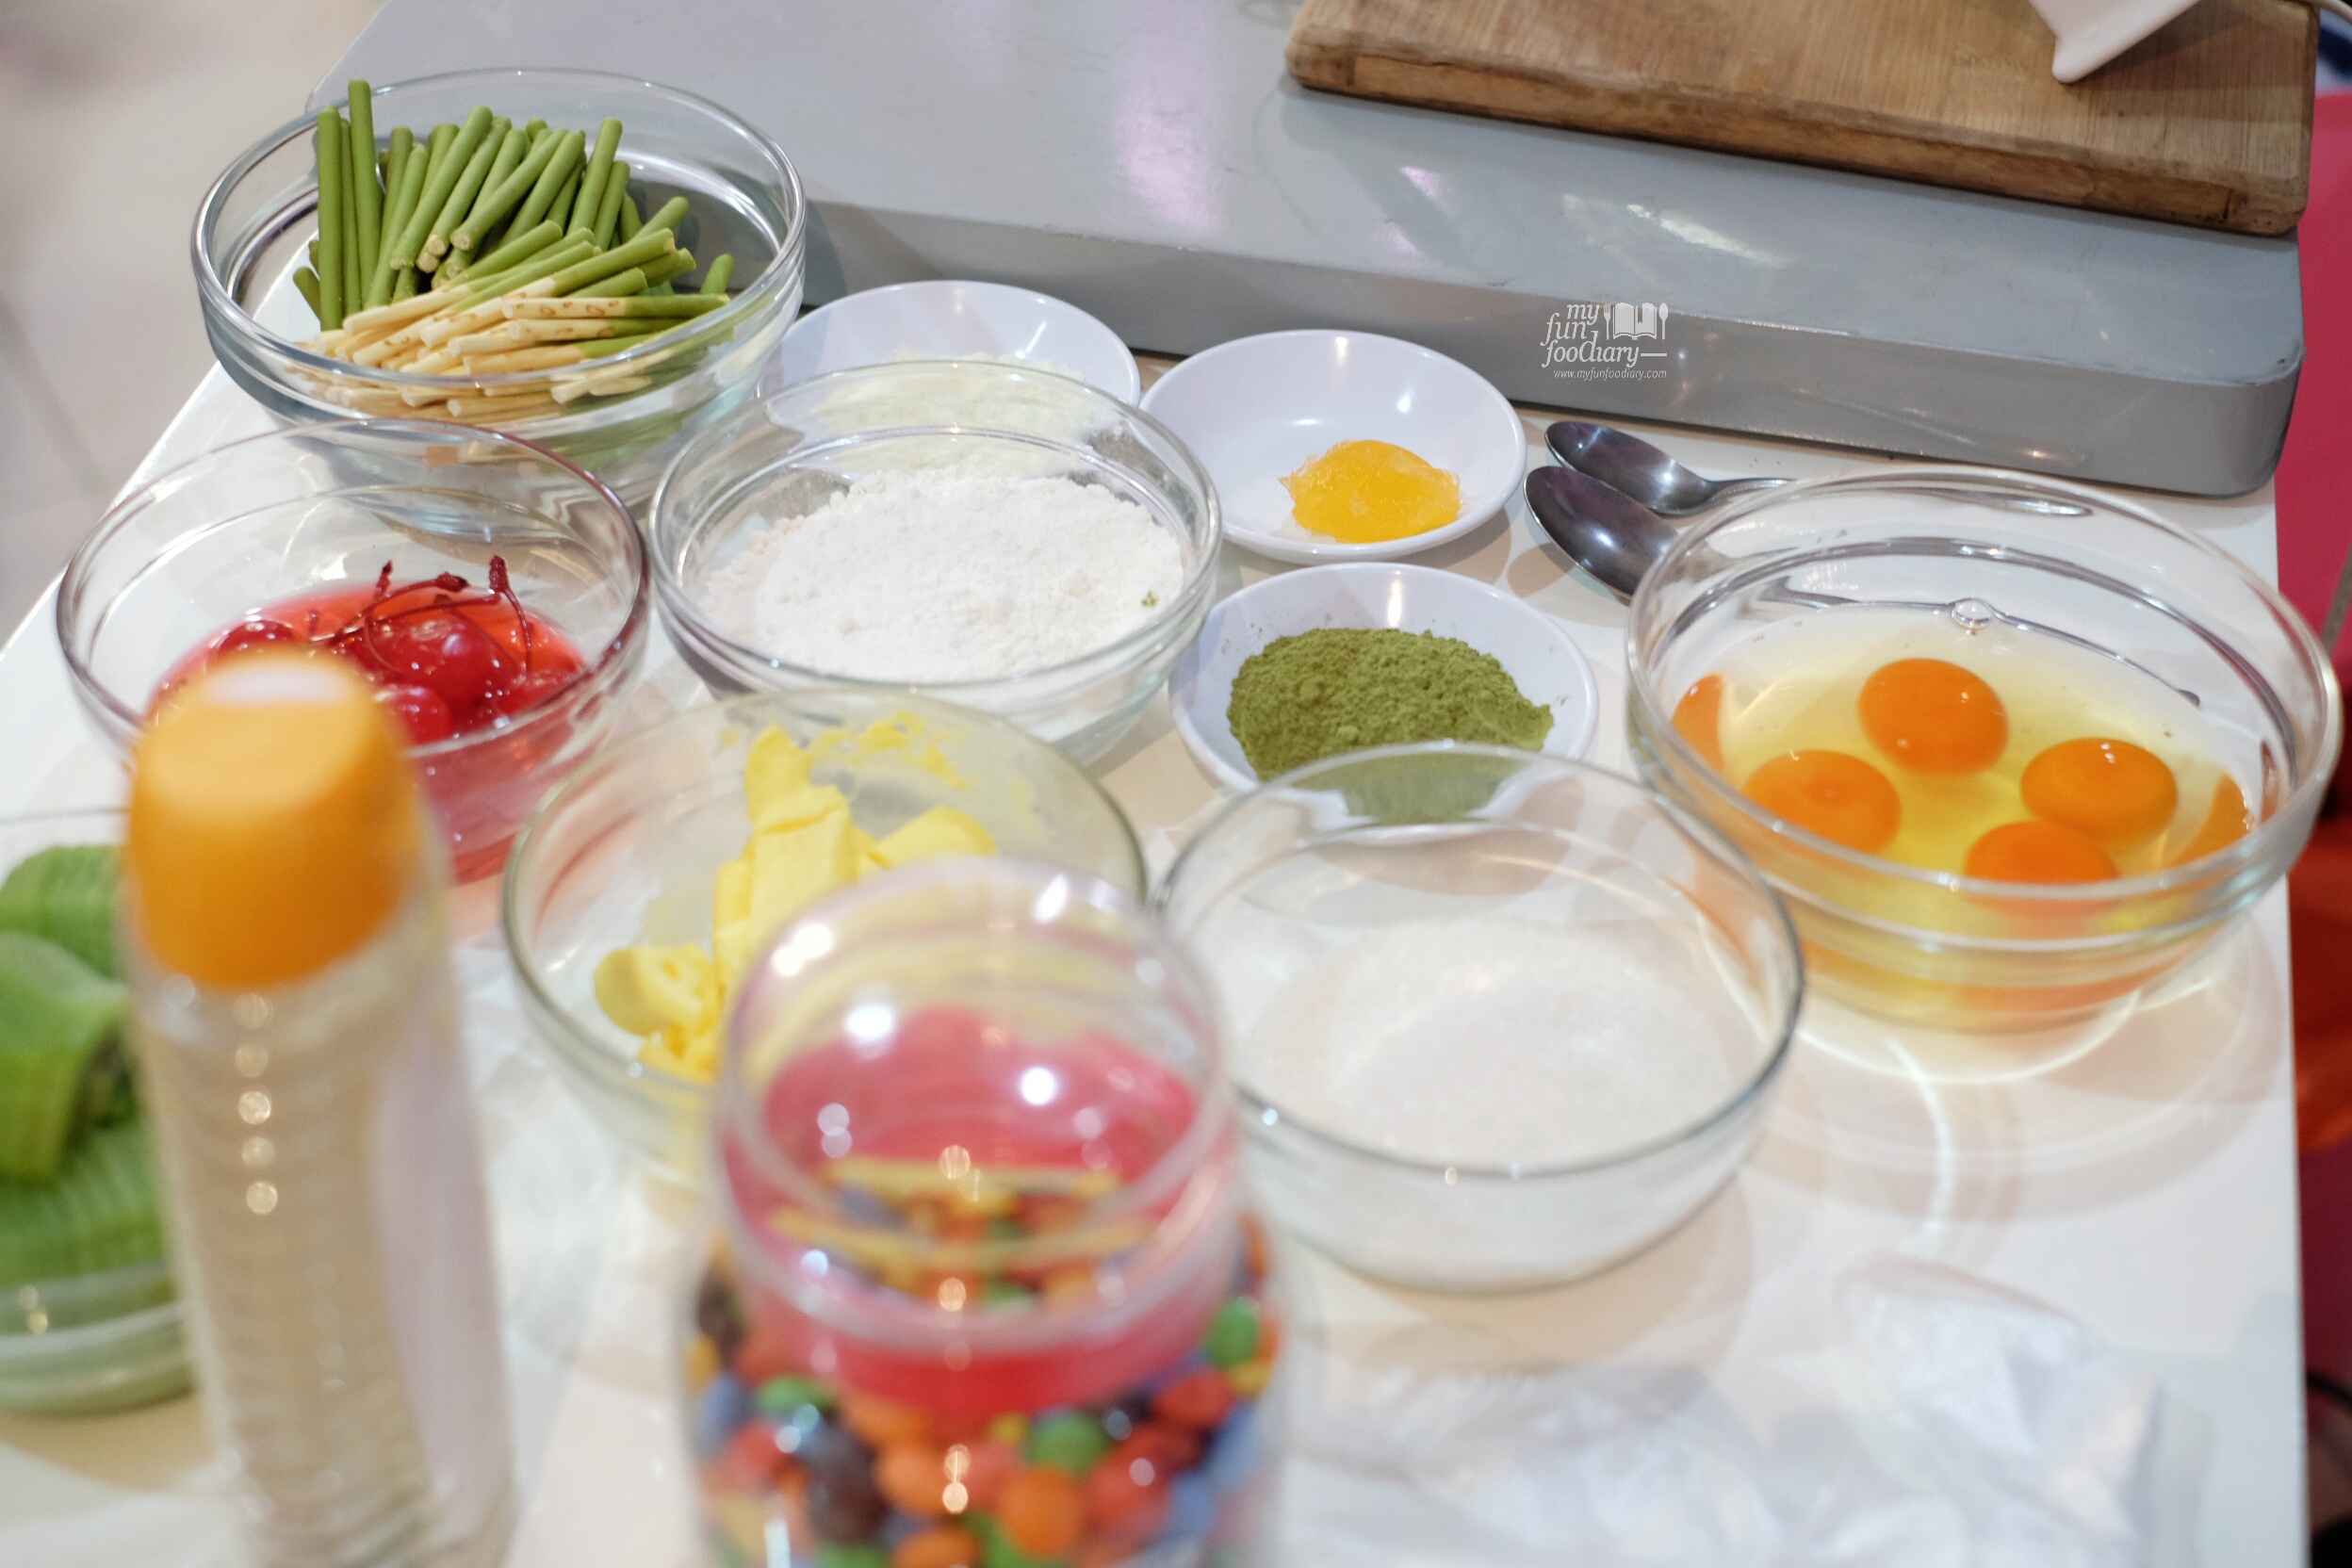 Ingredients to make Eco Green Matcha Cake by Chef Billy for Sharp Indonesia by Myfunfoodiary